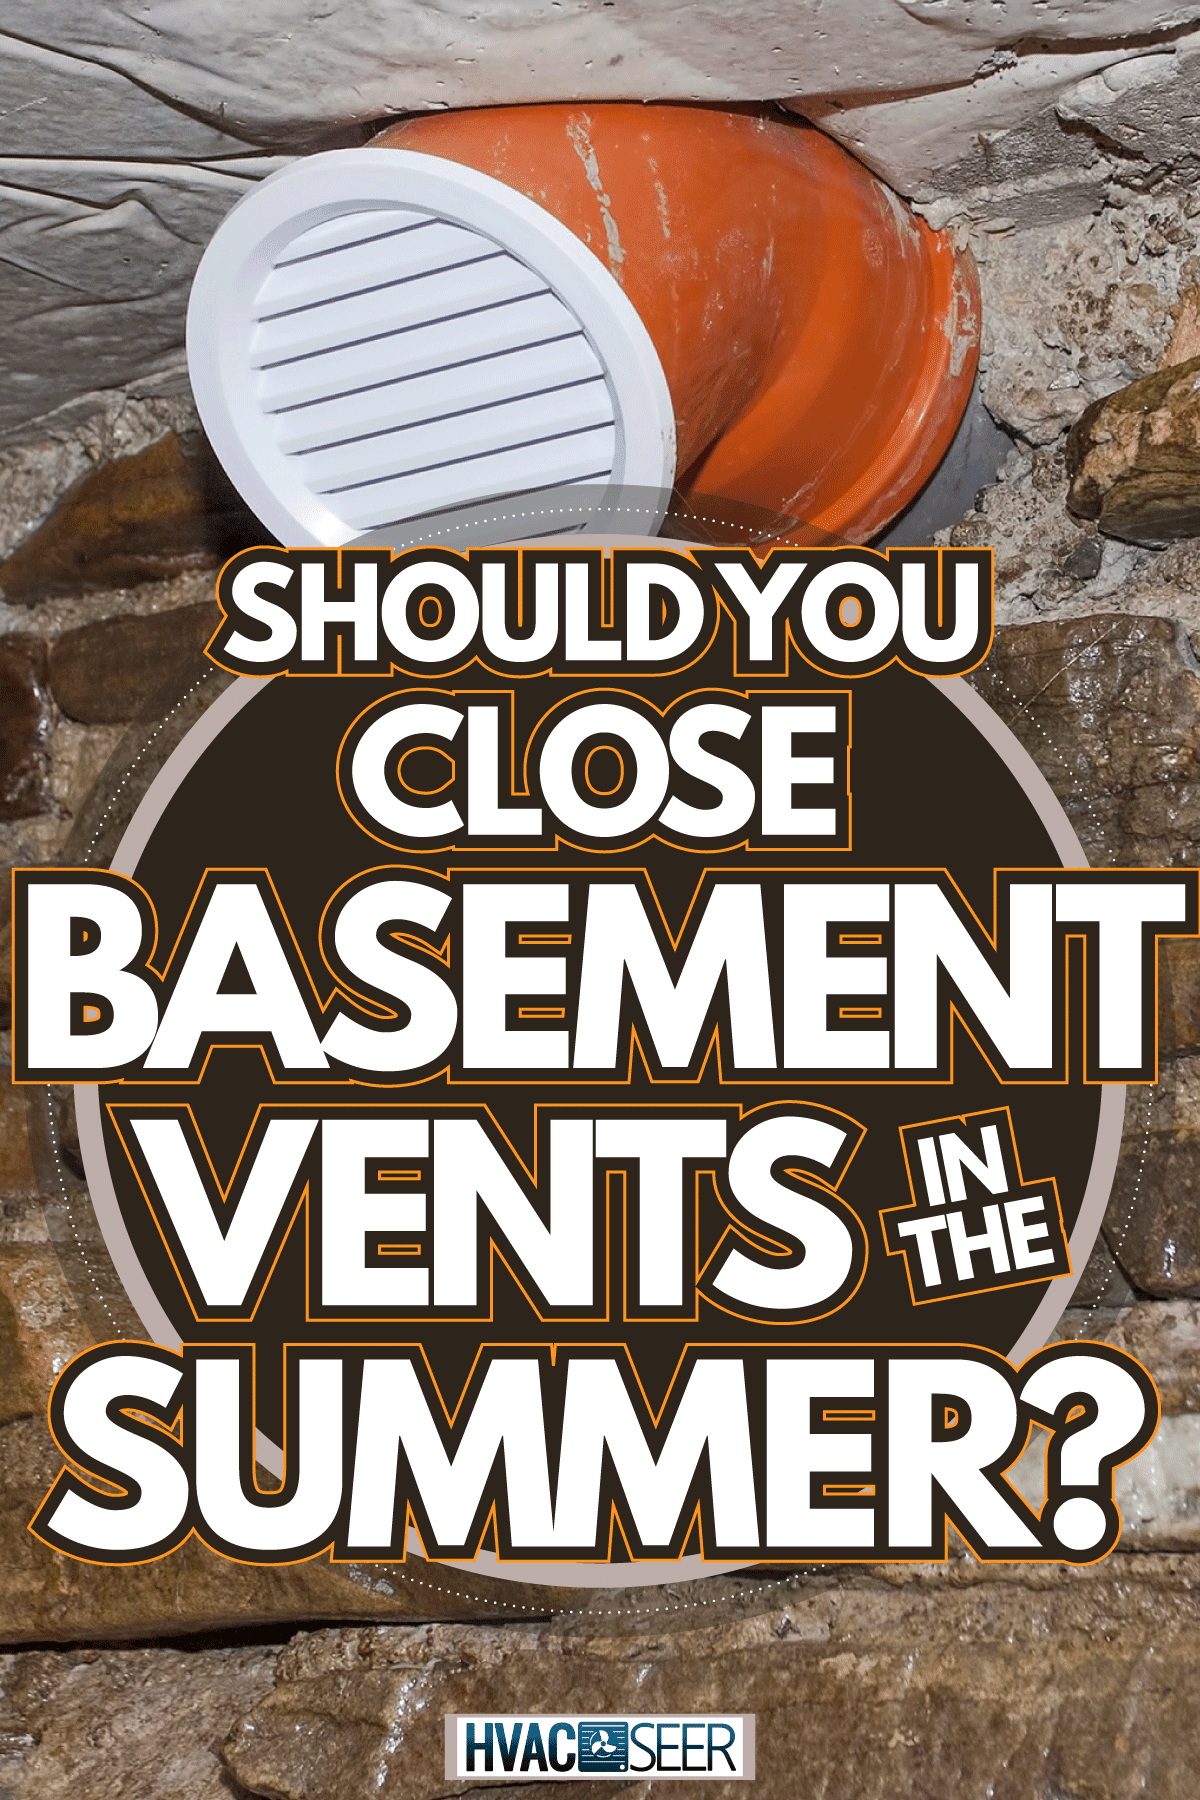 air vent or ventilation system in the basement, Should You Close Basement Vents In The Summer?